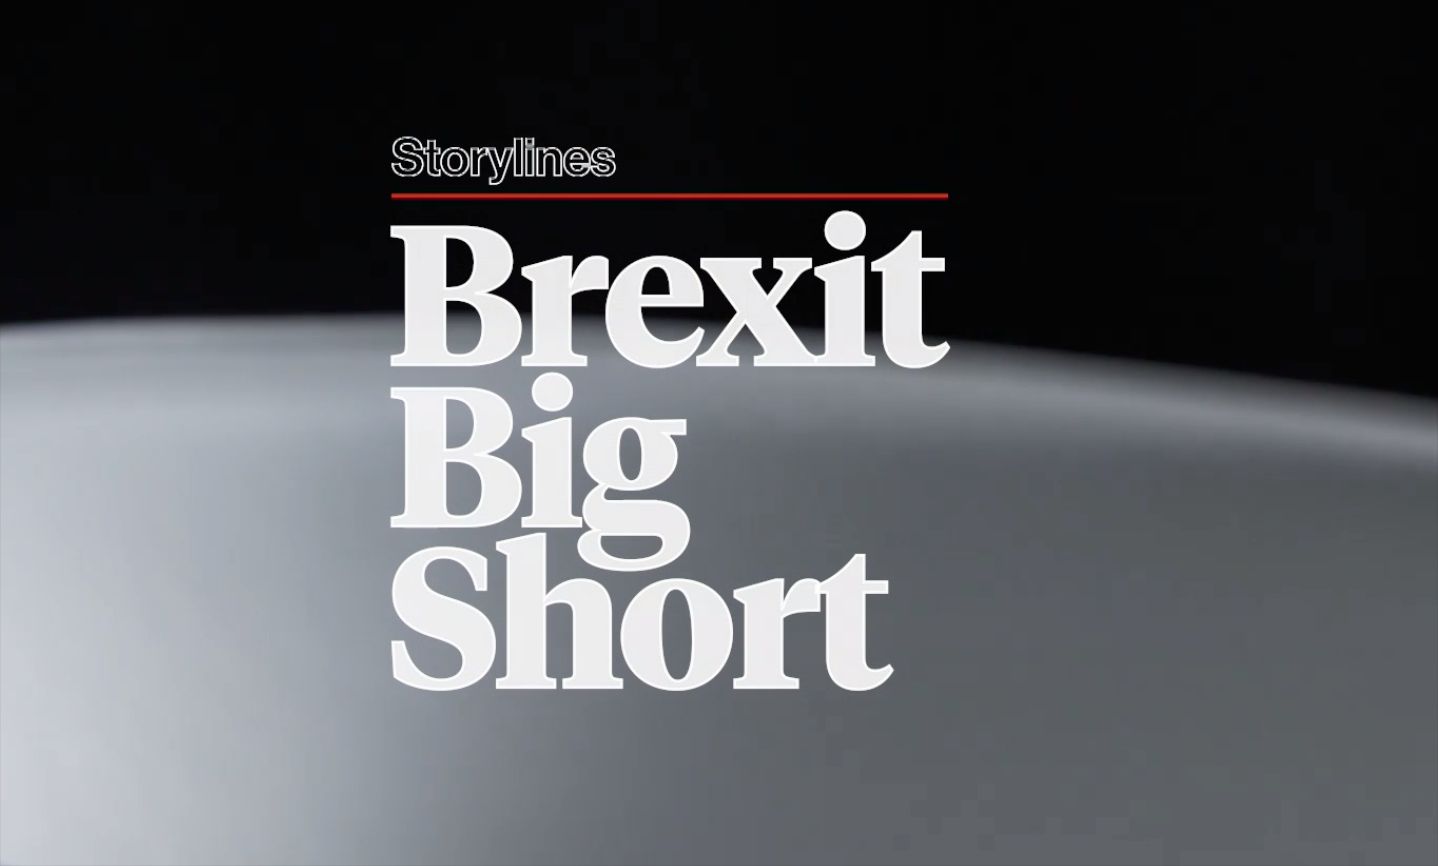 source : https://www.bloomberg.com/news/videos/2019-03-15/how-hedge-funds-gamed-brexit-to-make-millions-video